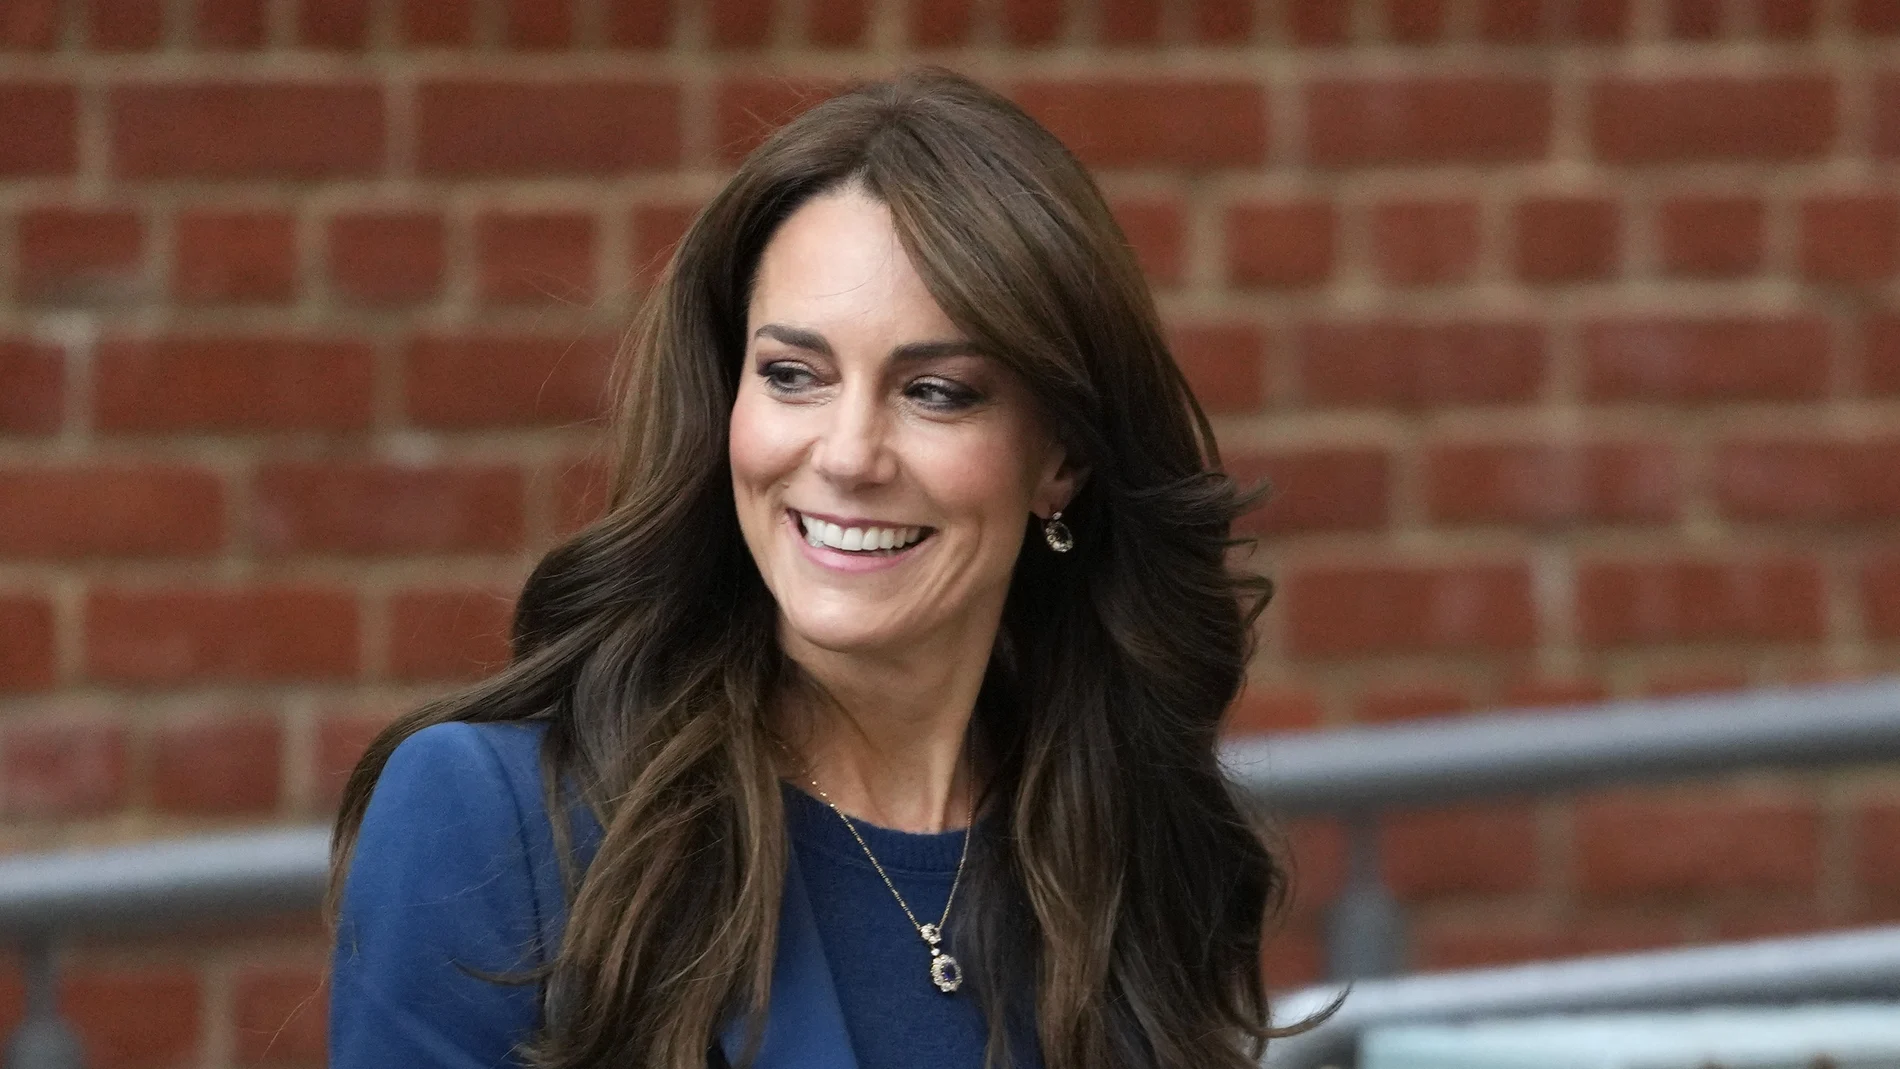 Britain's Kate, The Princess of Wales smiles during a visit to Evelina London at St Thomas' hospital in London